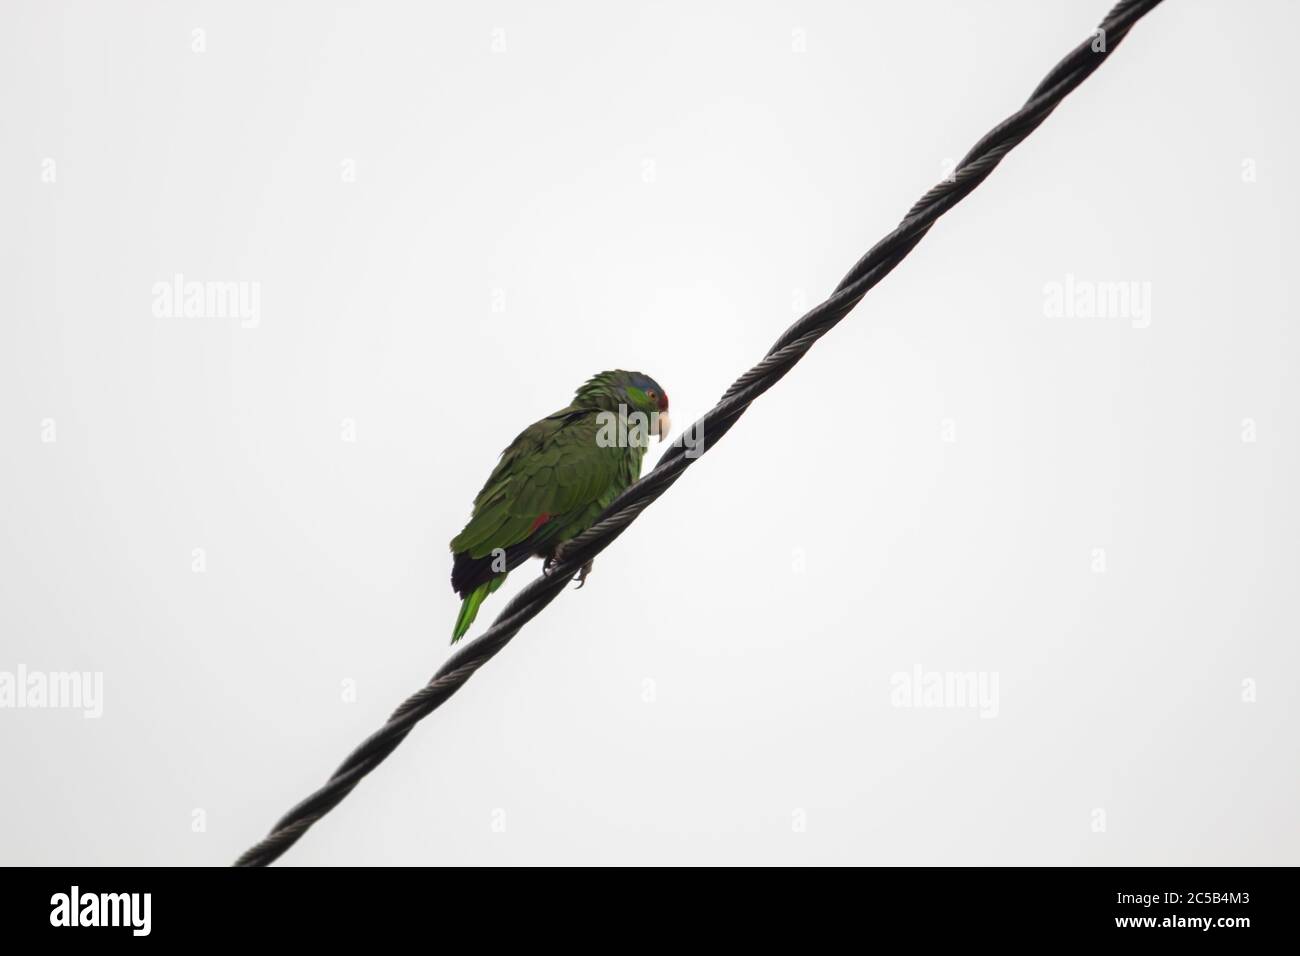 Closeup shot of a Rose-ringed parakeet parrot sitting on a wire Stock Photo